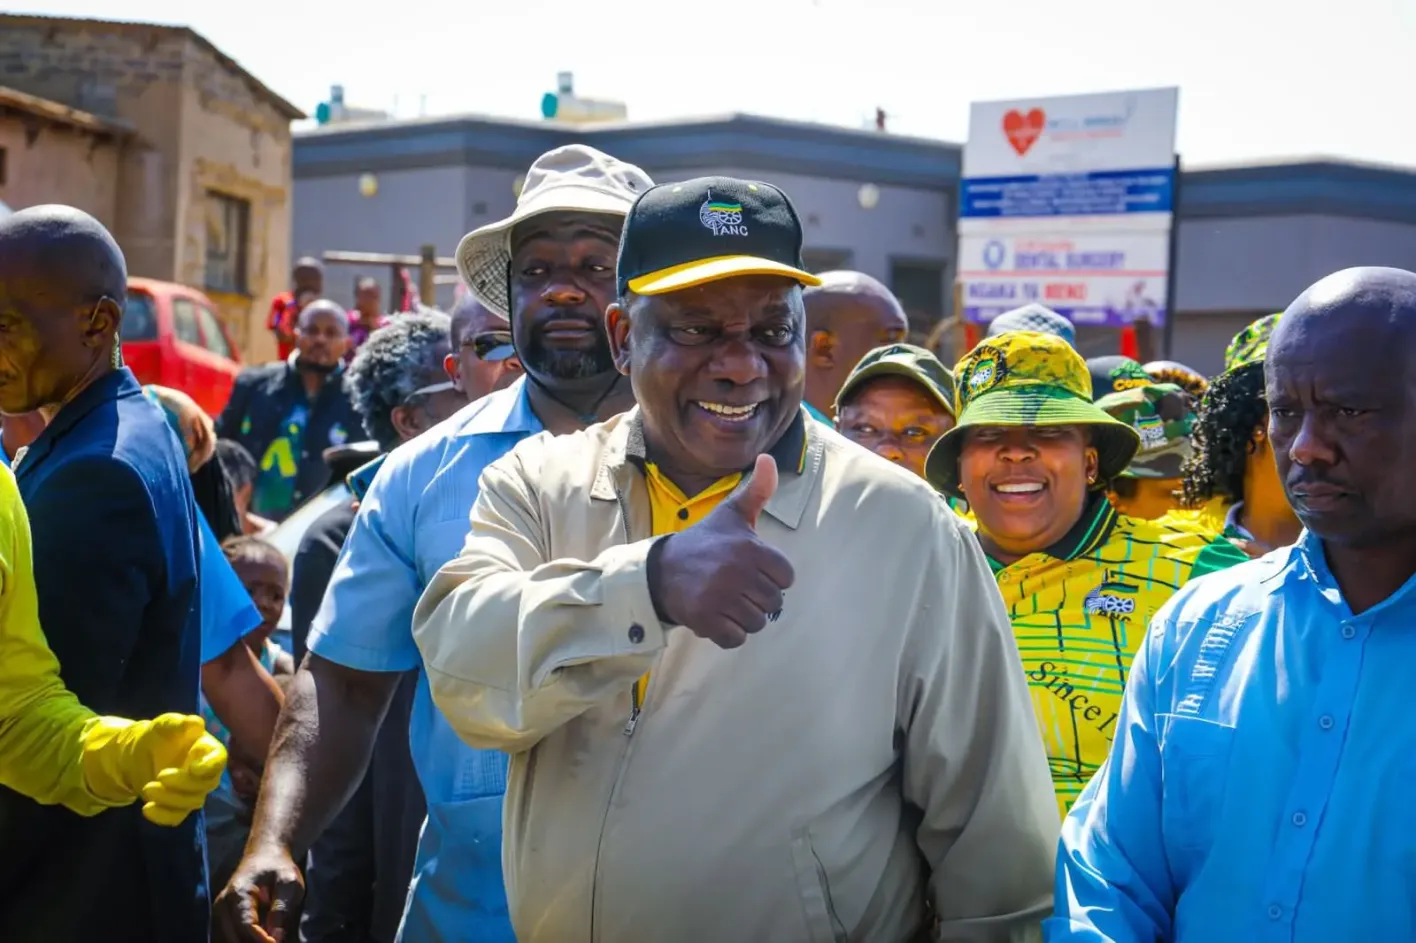 President Ramaphosa doesn’t anticipate any violence ahead of ANC nomination process